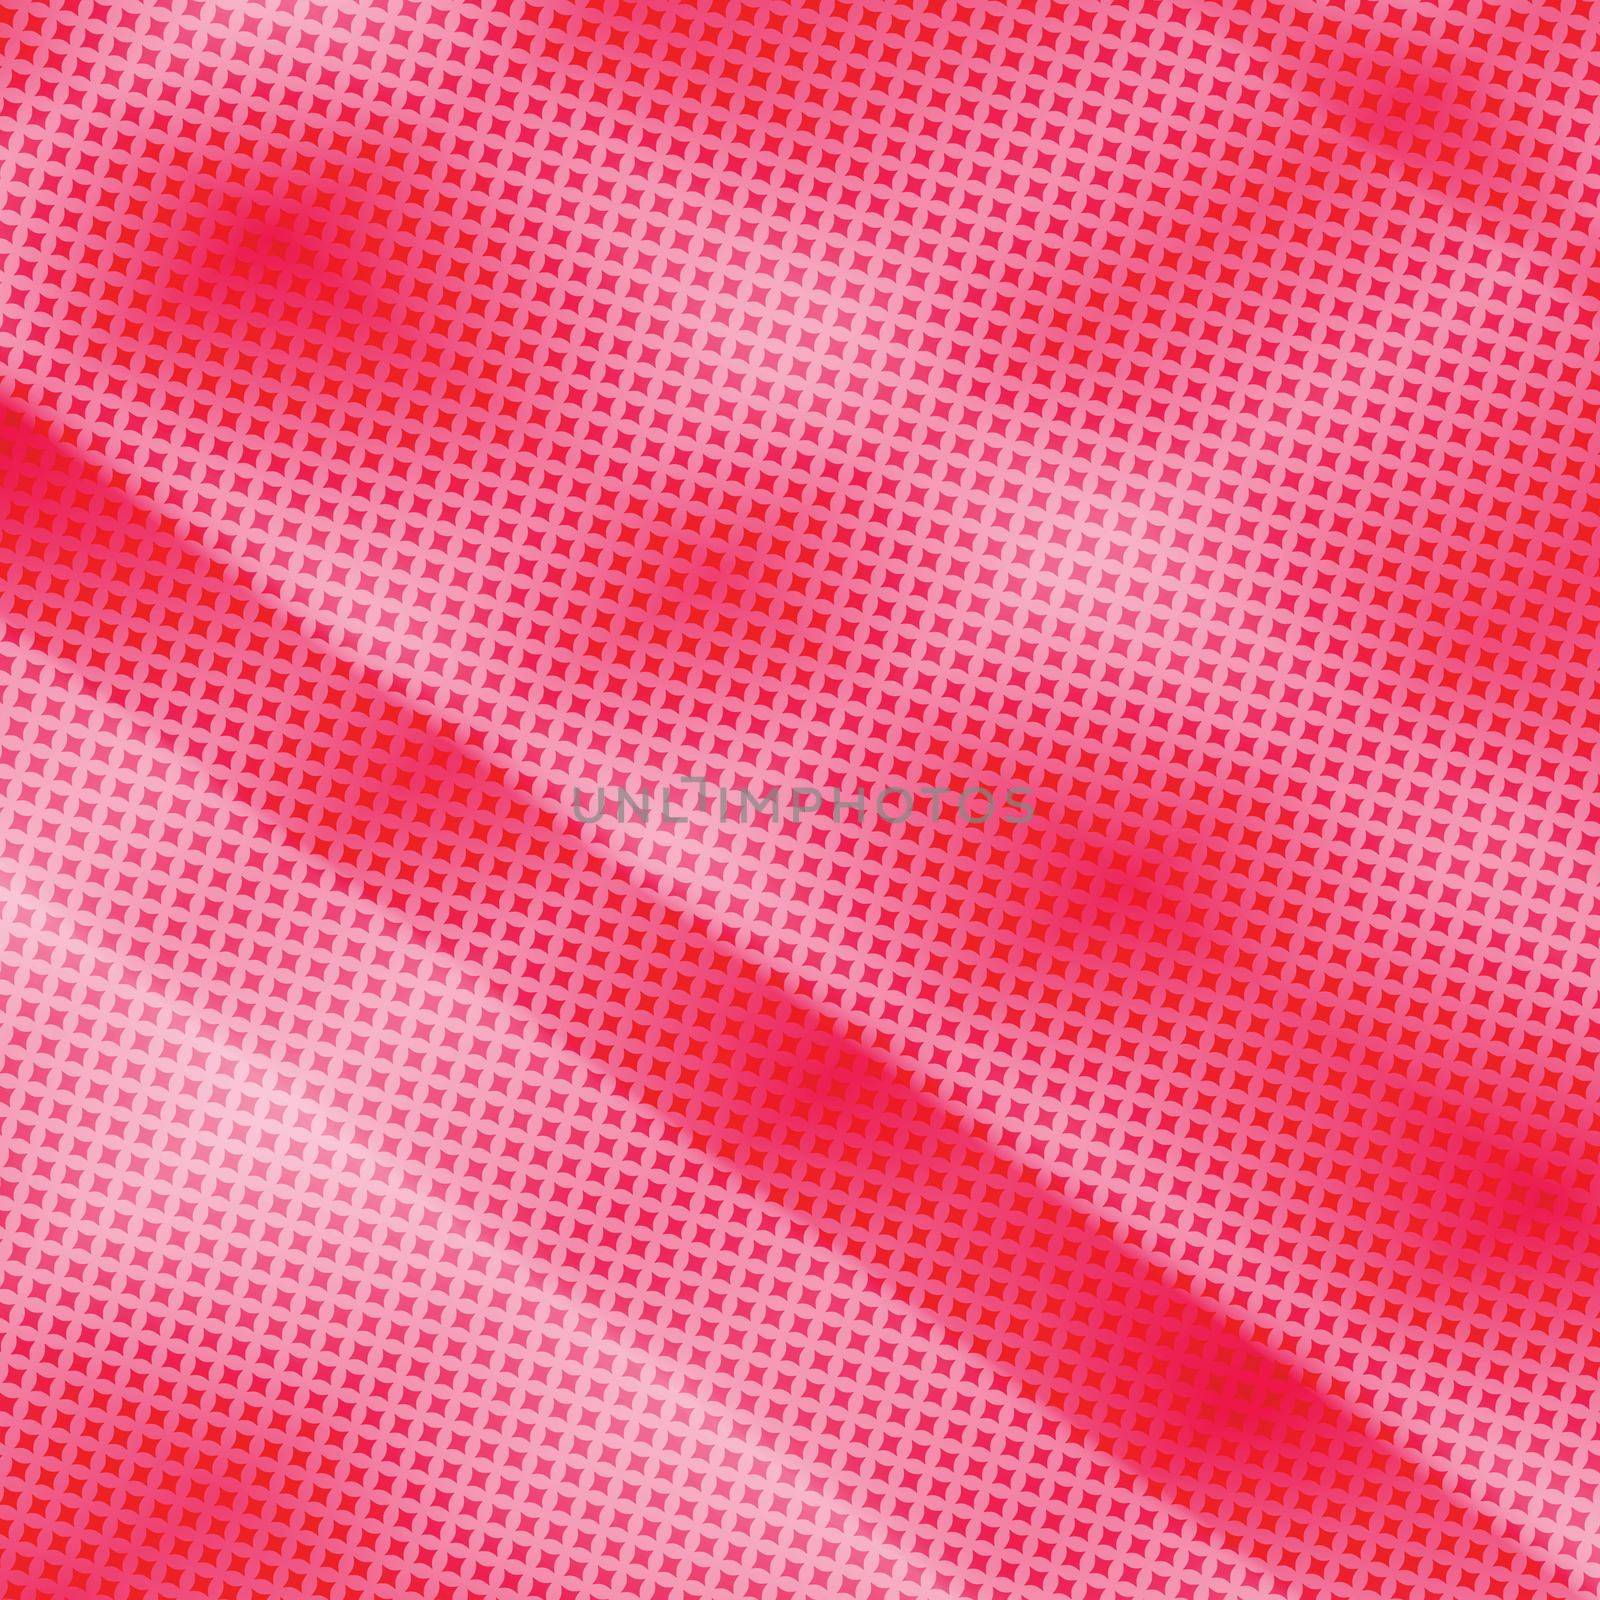 90-s style. Creative illustration in halftone style with pink gradient. Abstract colorful geometric background. Pattern for wallpaper, web page, textures.